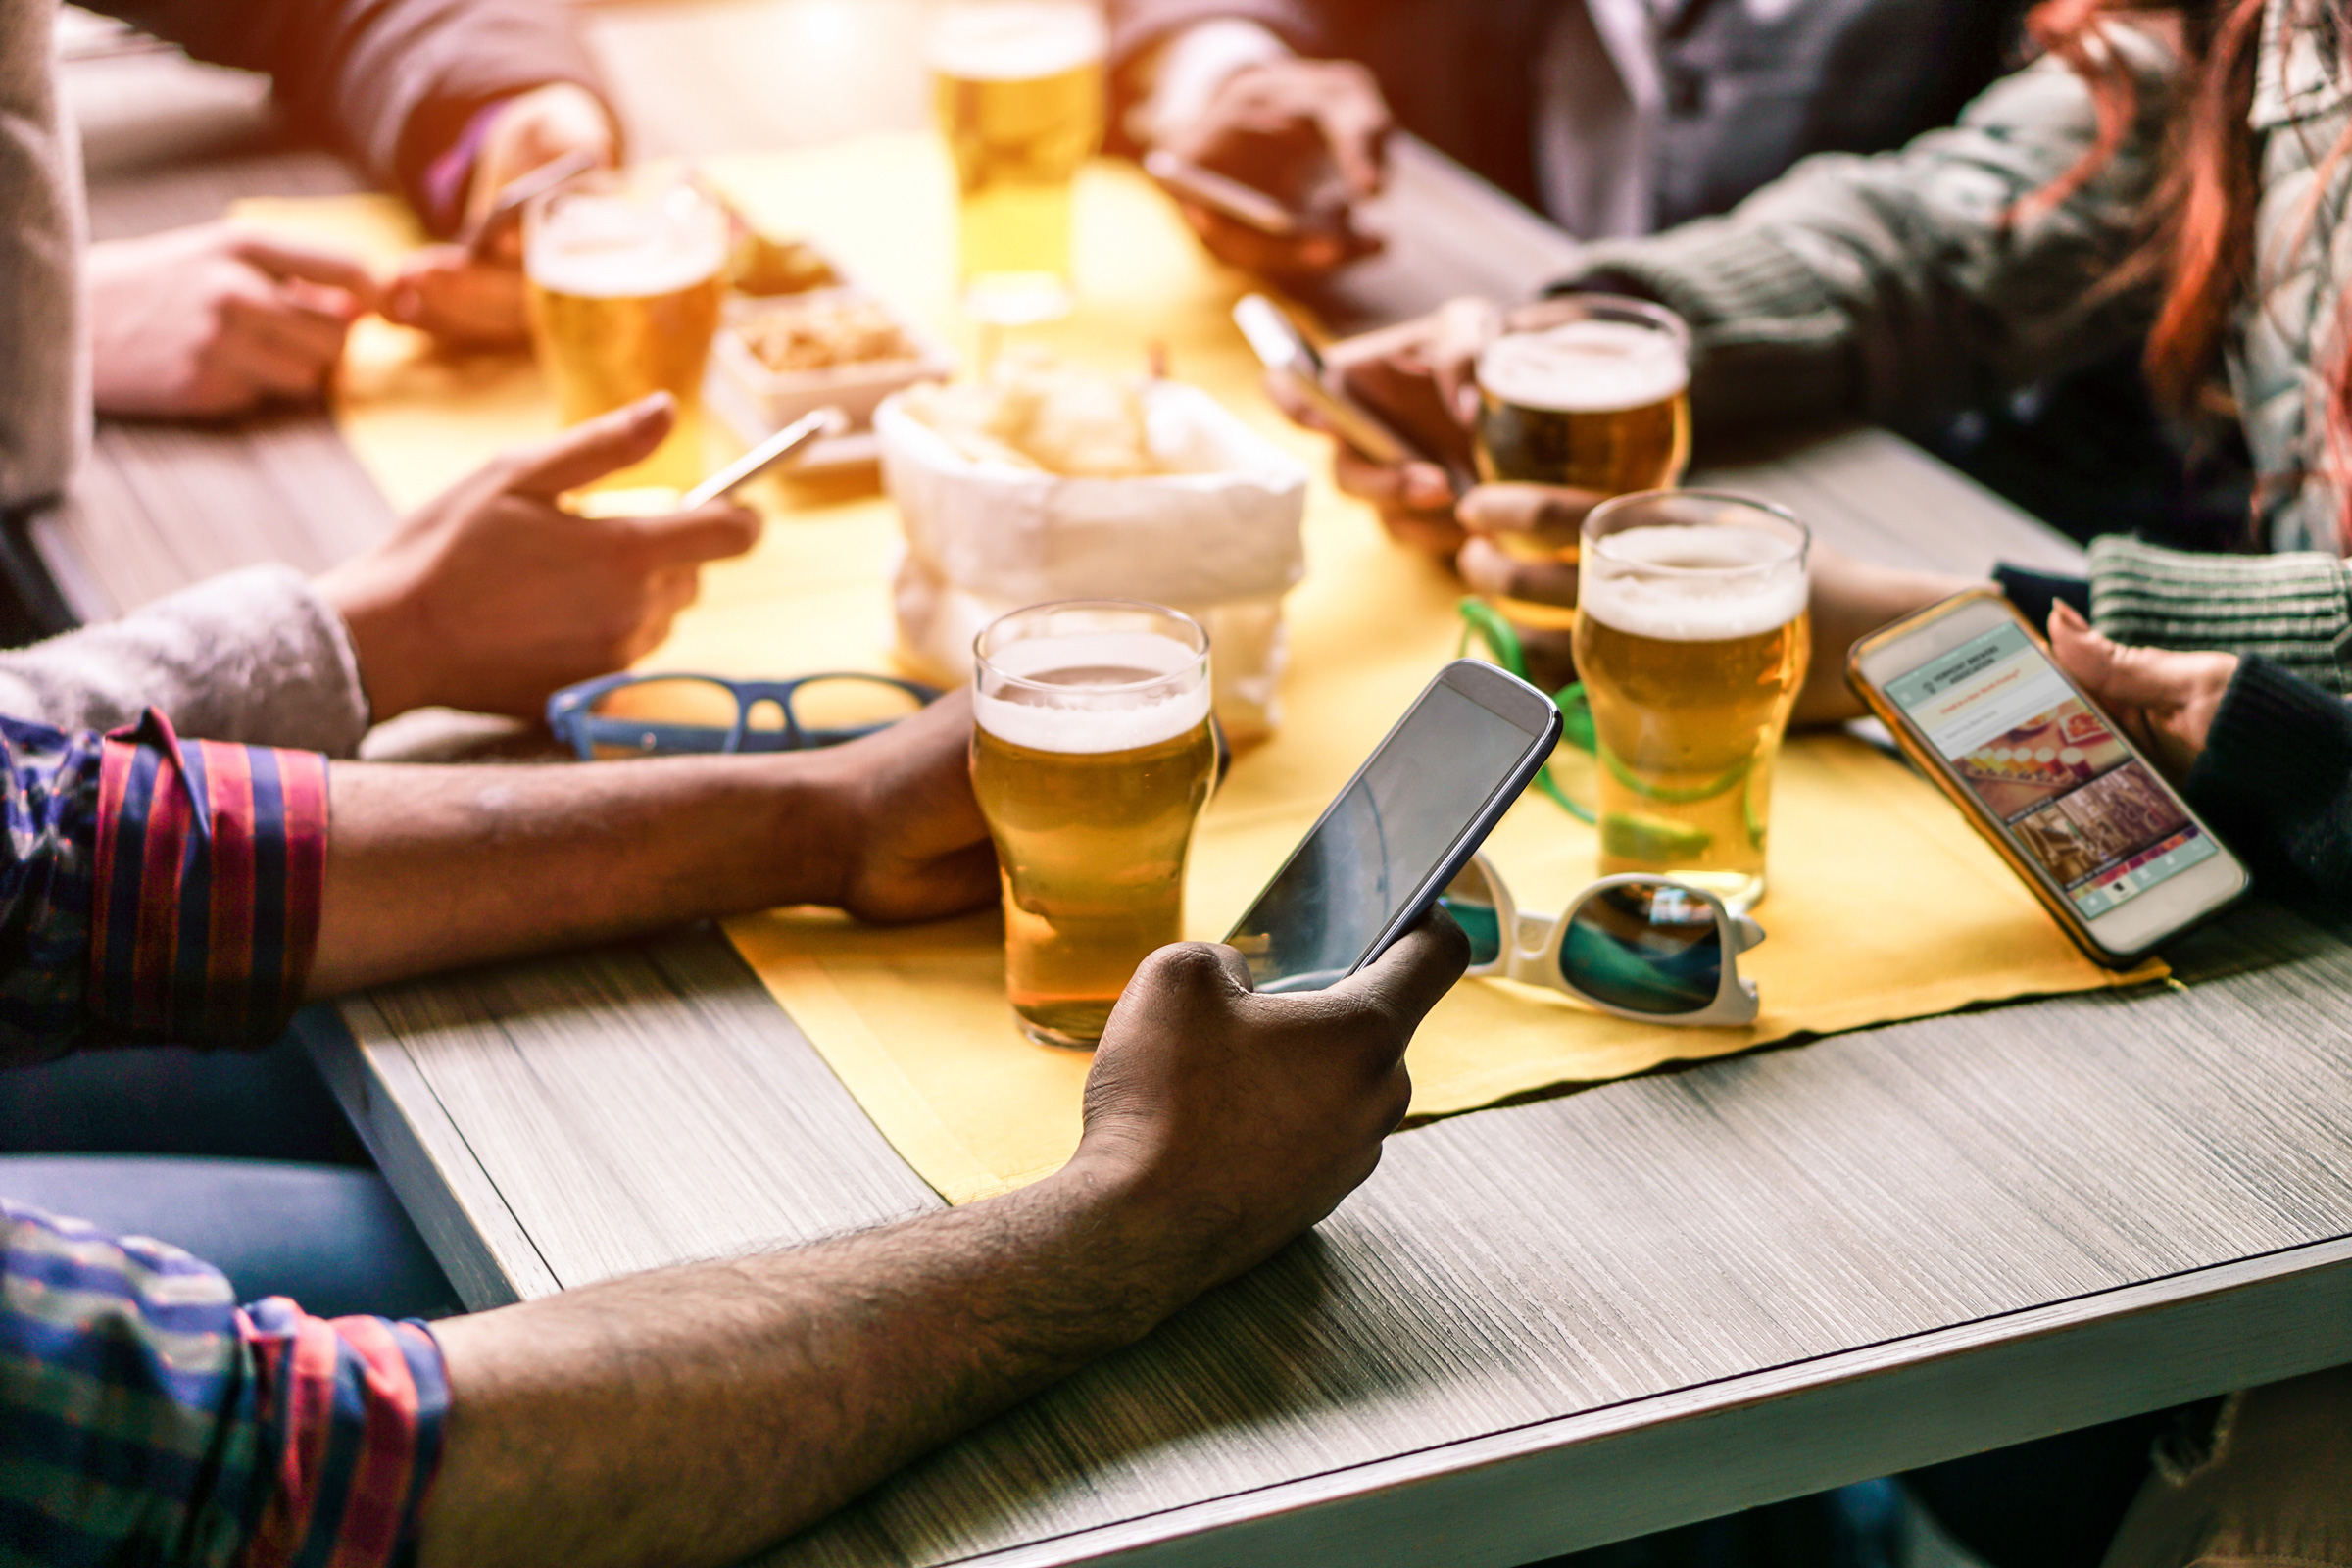 Brewers Marketing apps are designed to help craft beer aficionados discover and engage with local breweries.